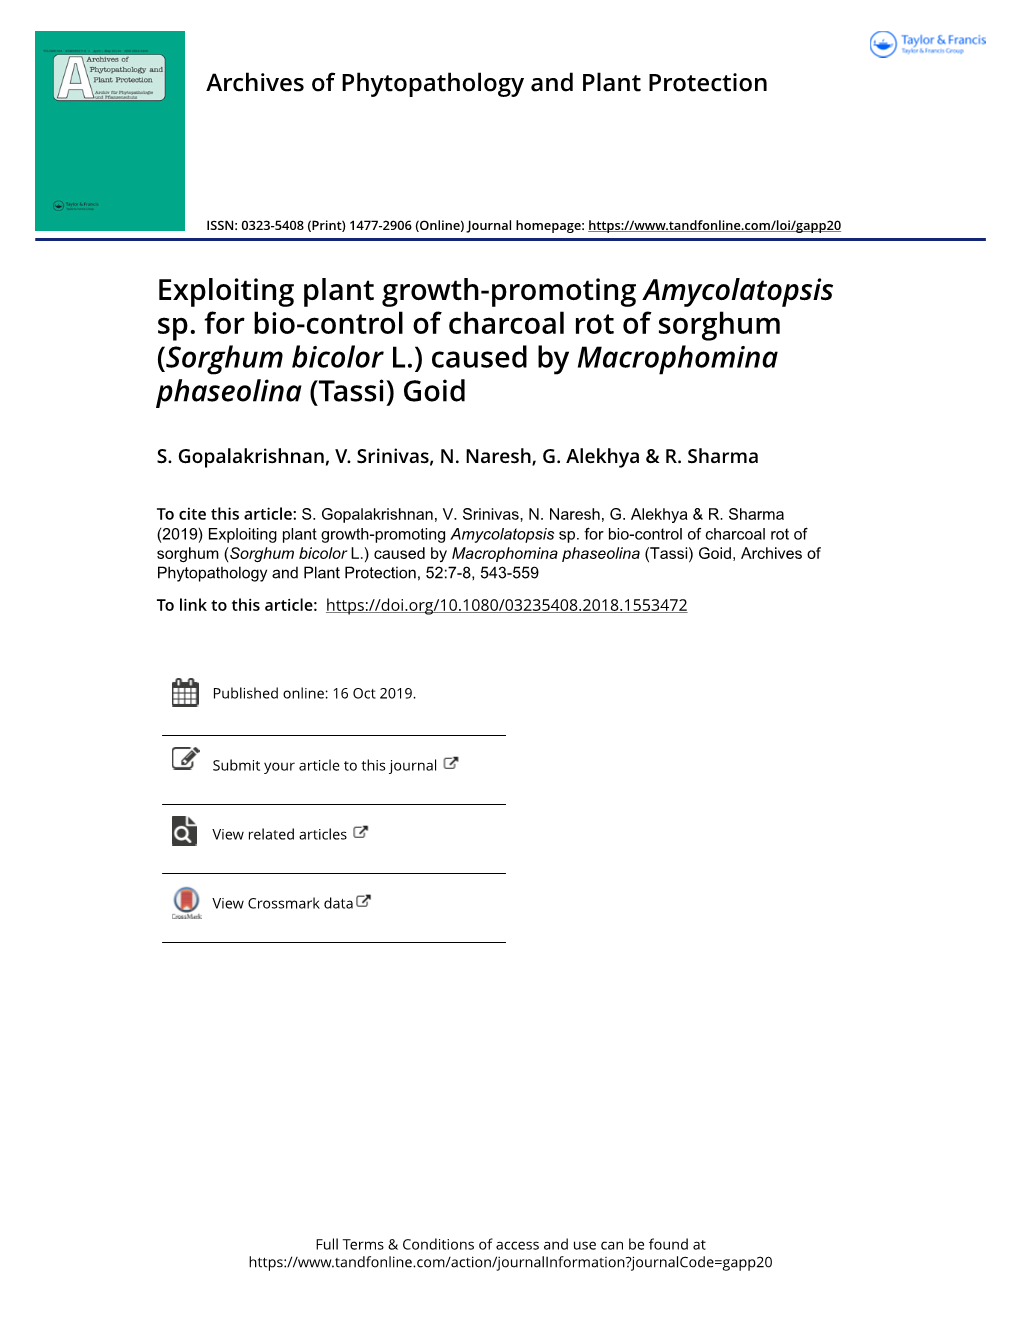 Exploiting Plant Growth-Promoting Amycolatopsis Sp. for Bio-Control of Charcoal Rot of Sorghum (Sorghum Bicolor L.) Caused by Macrophomina Phaseolina (Tassi) Goid